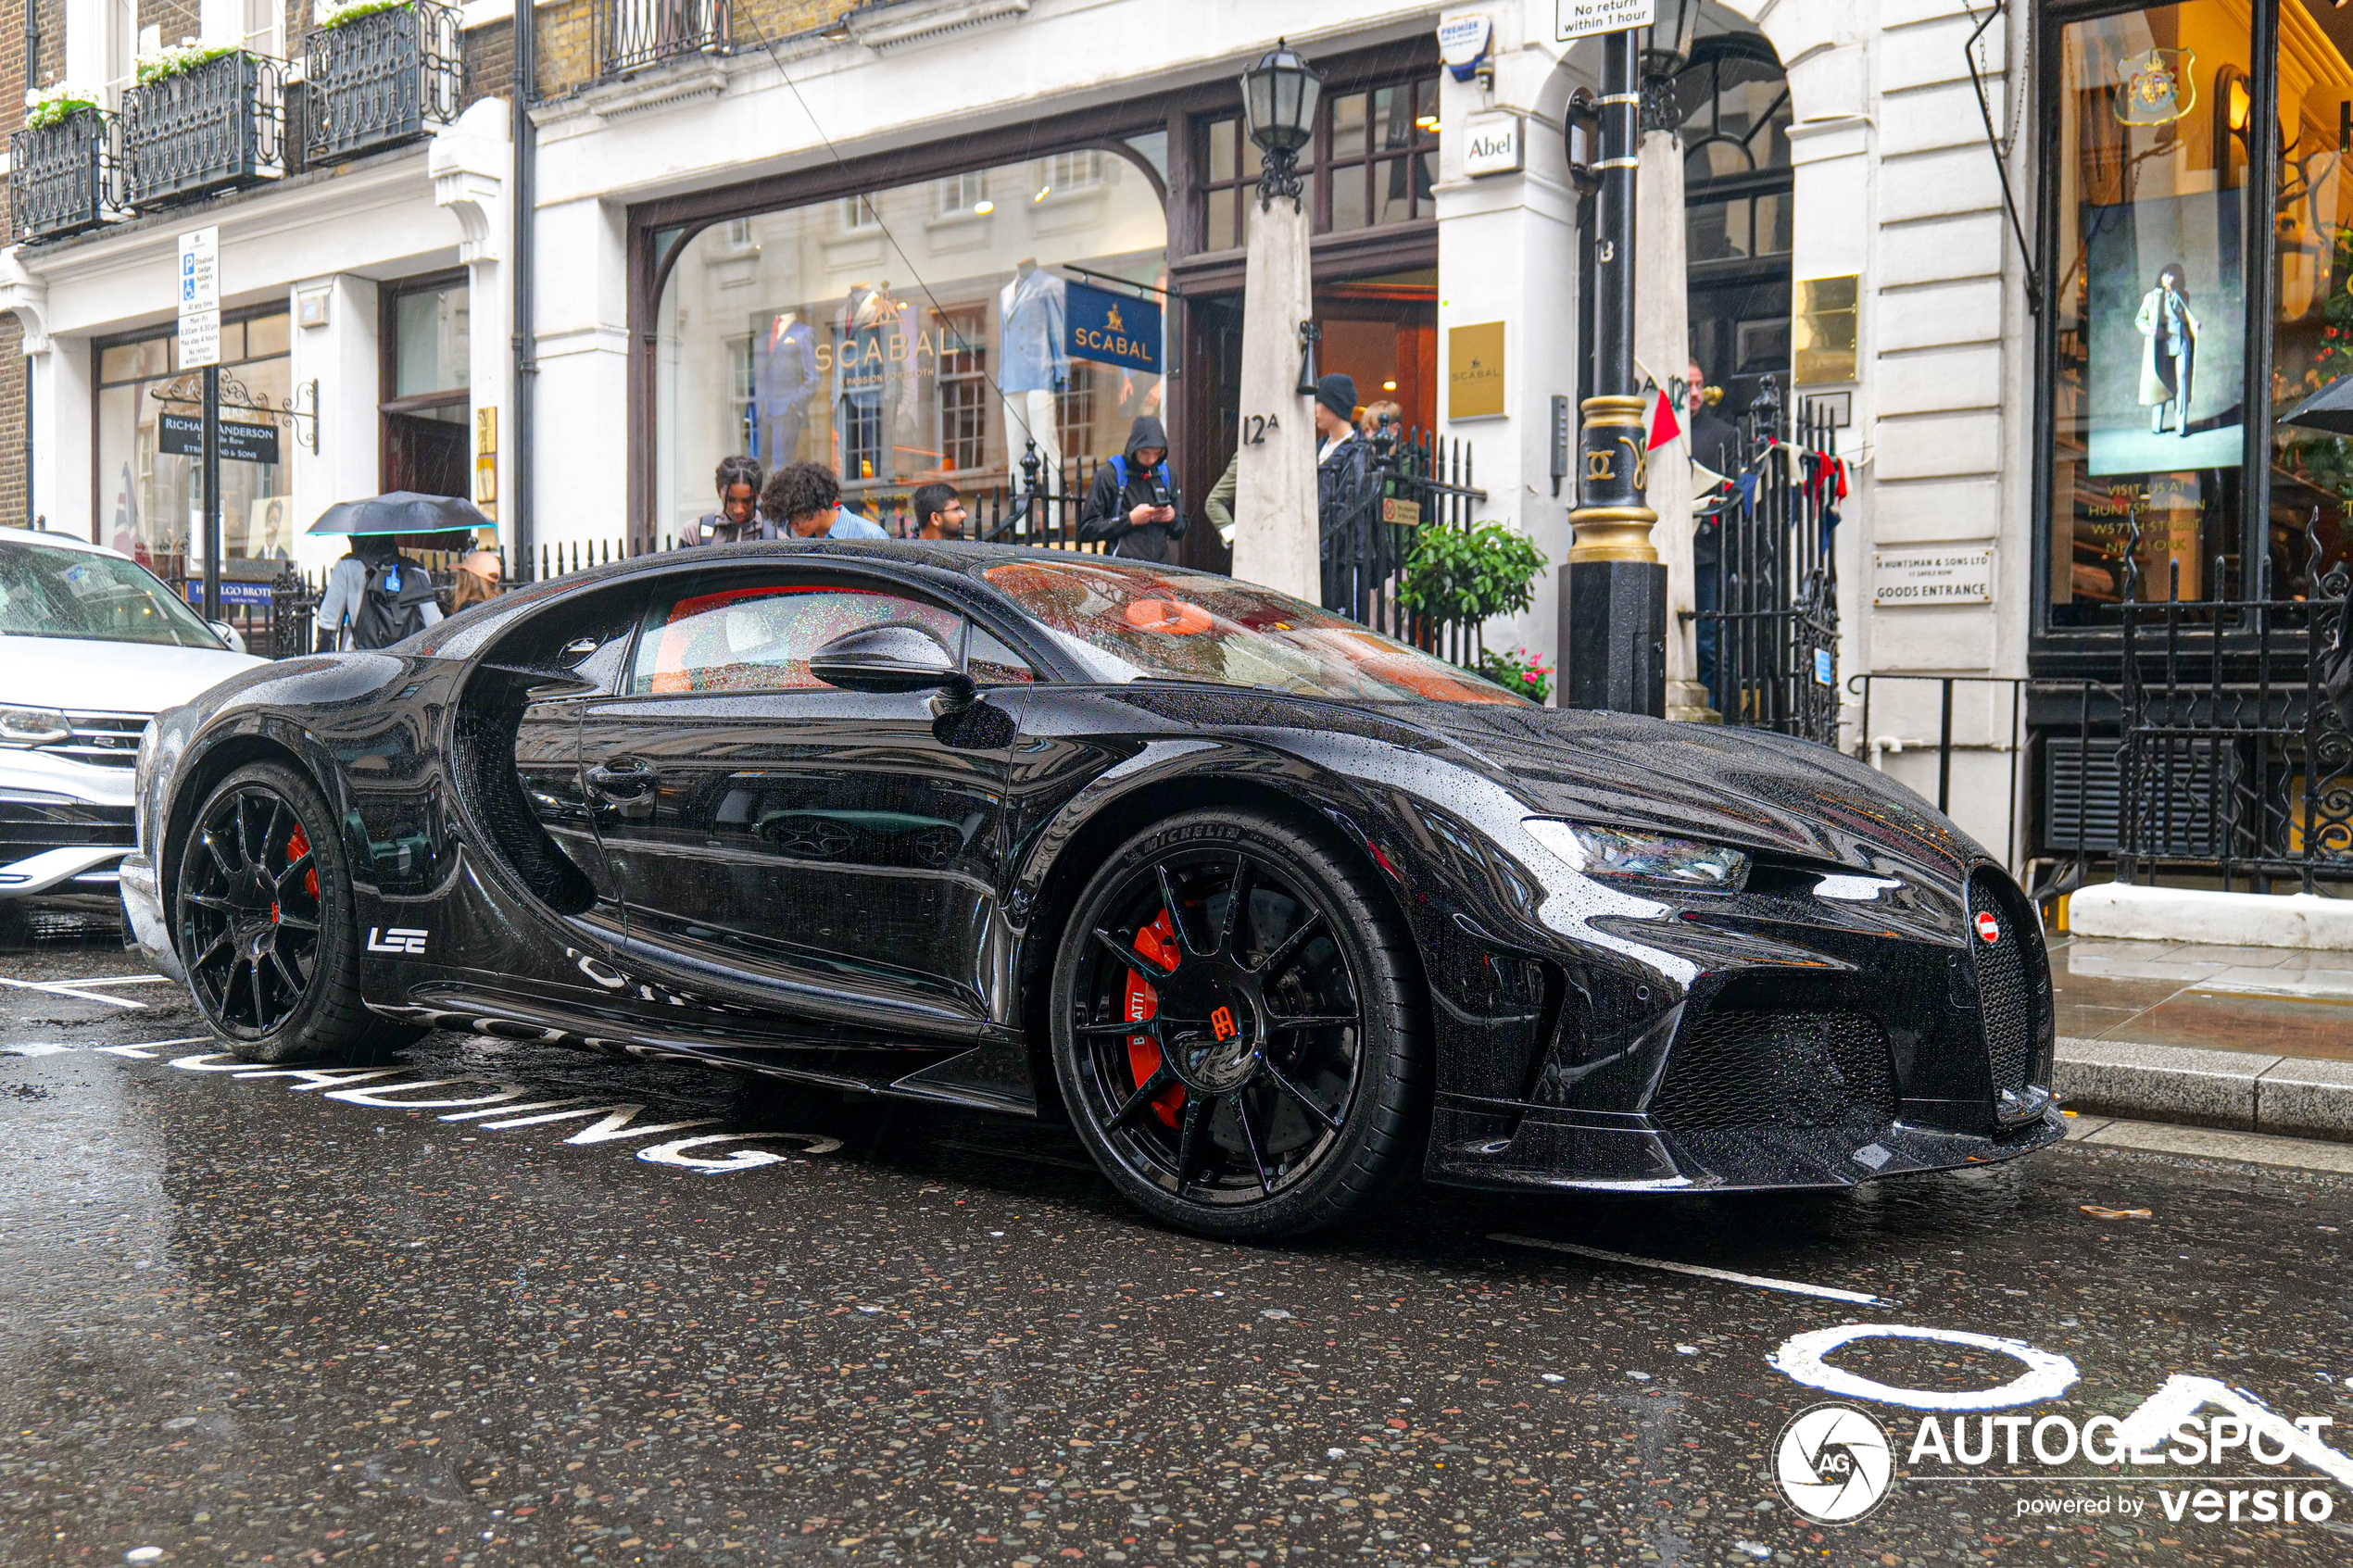 A new Chiron Super Sport shows up in London